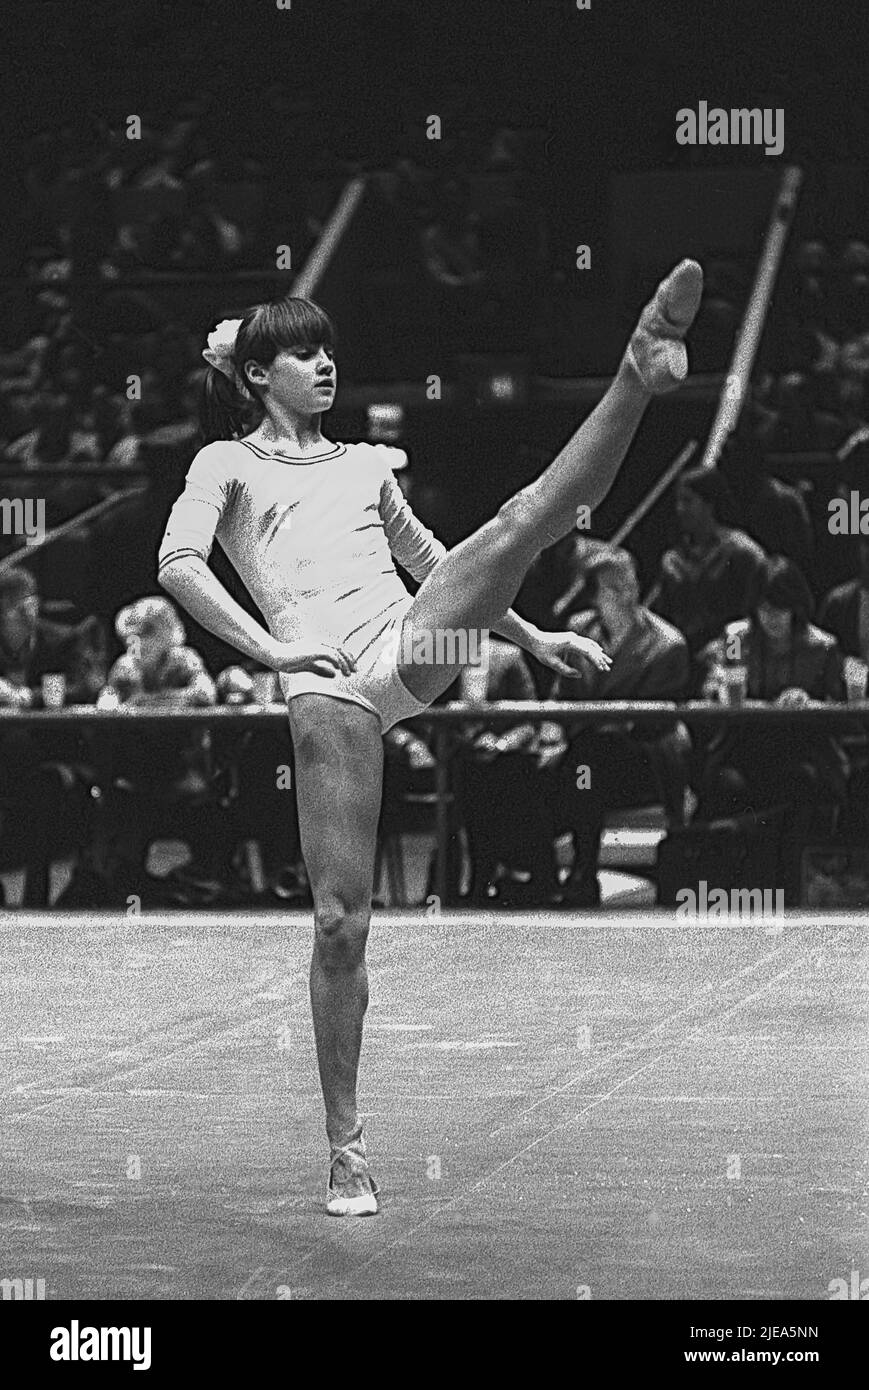 Nadia Comanici (ROM) cometing at the 1976 American Cup Stock Photo